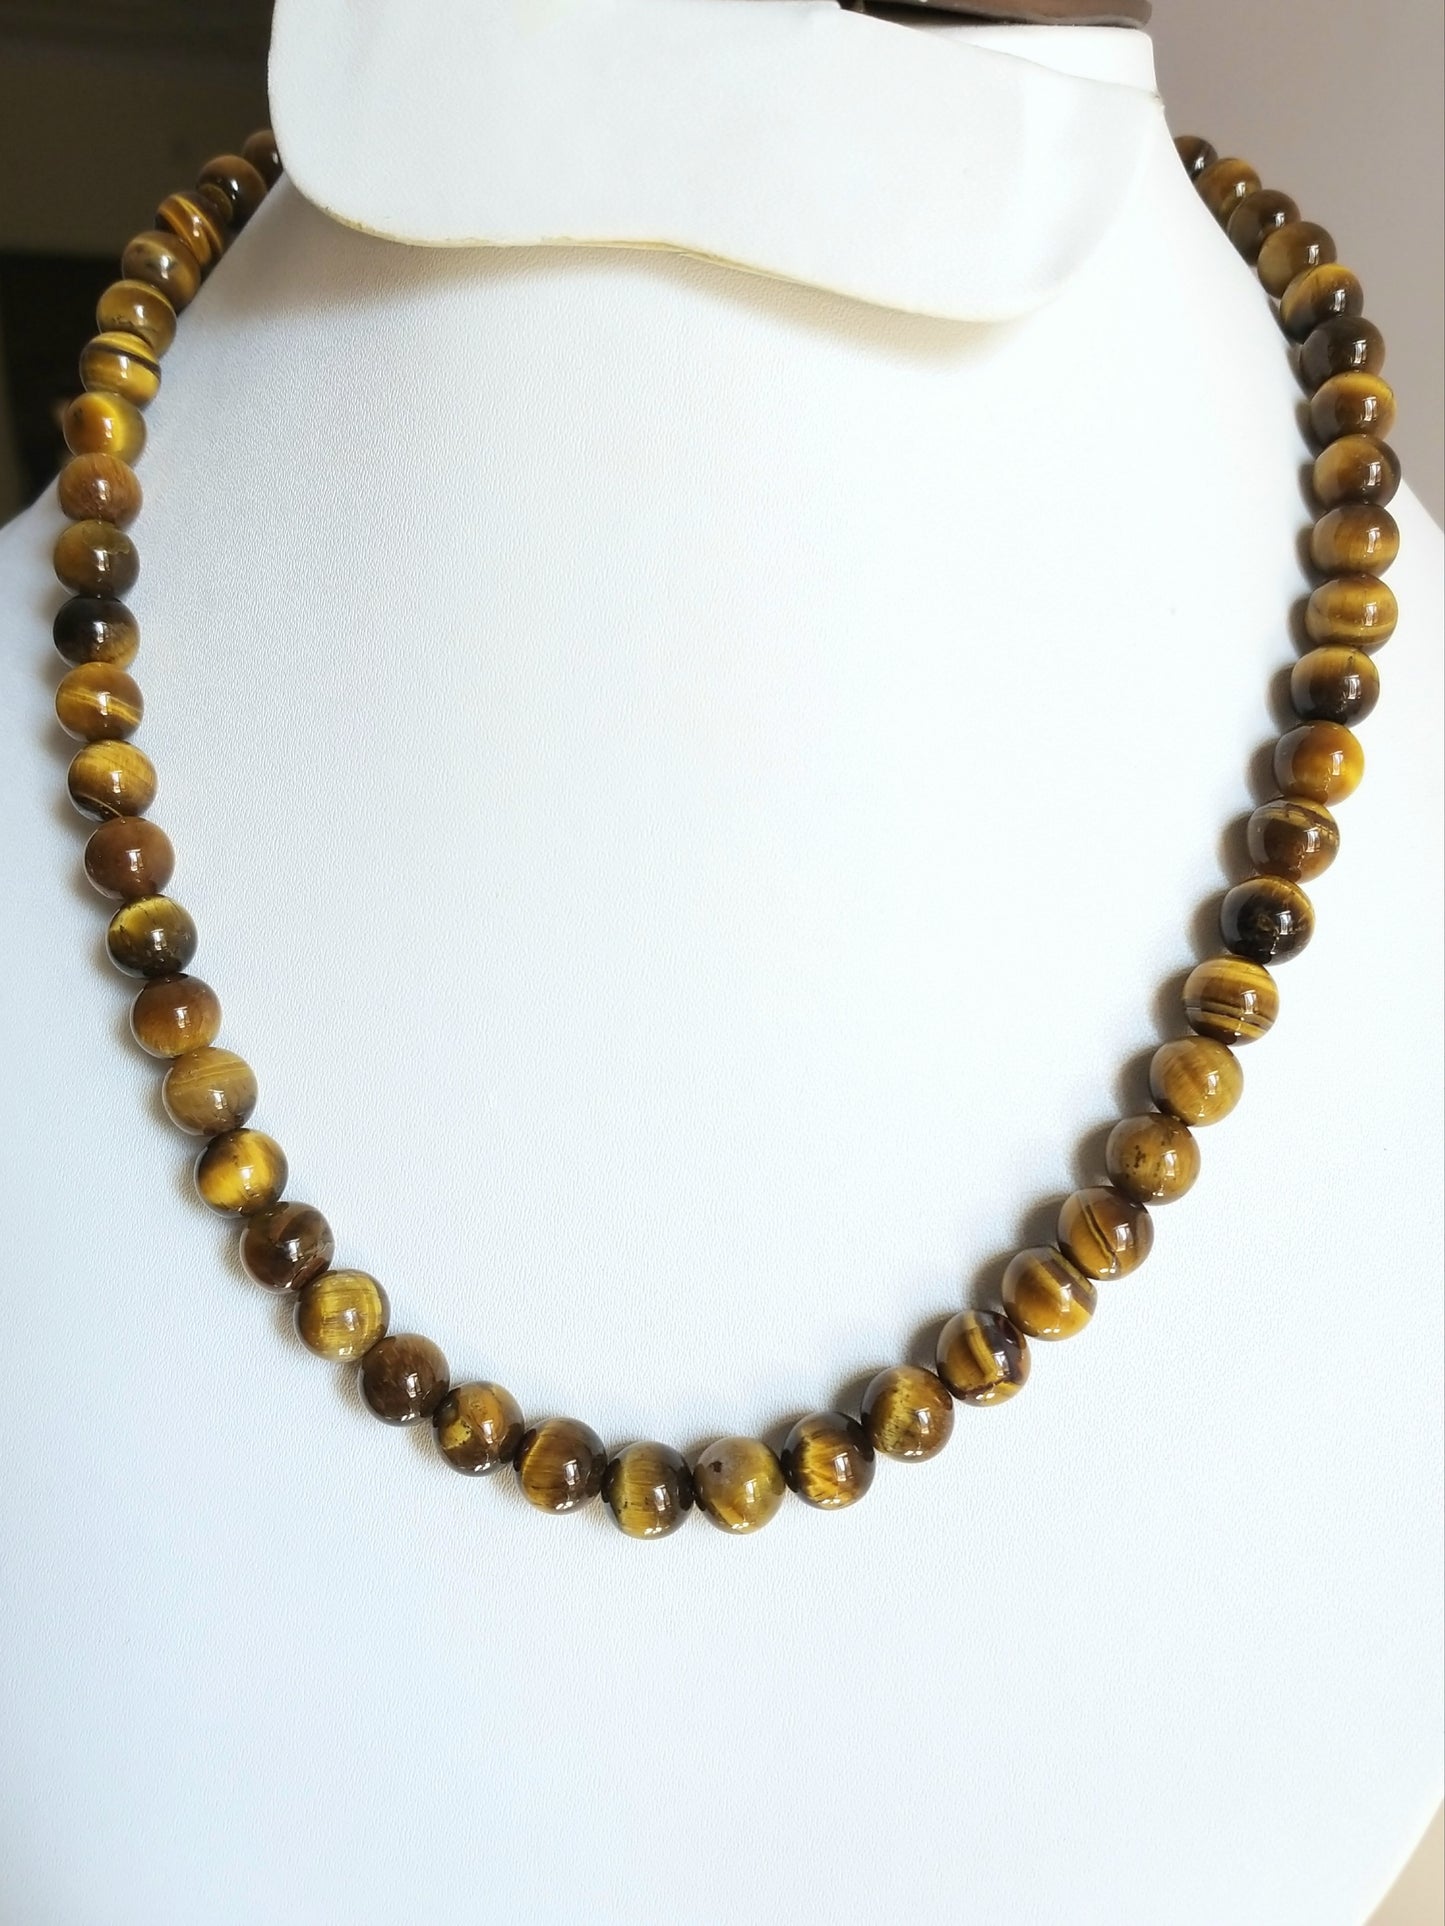 Natural Tiger's Eye Beads Necklace, Large Beads Necklace